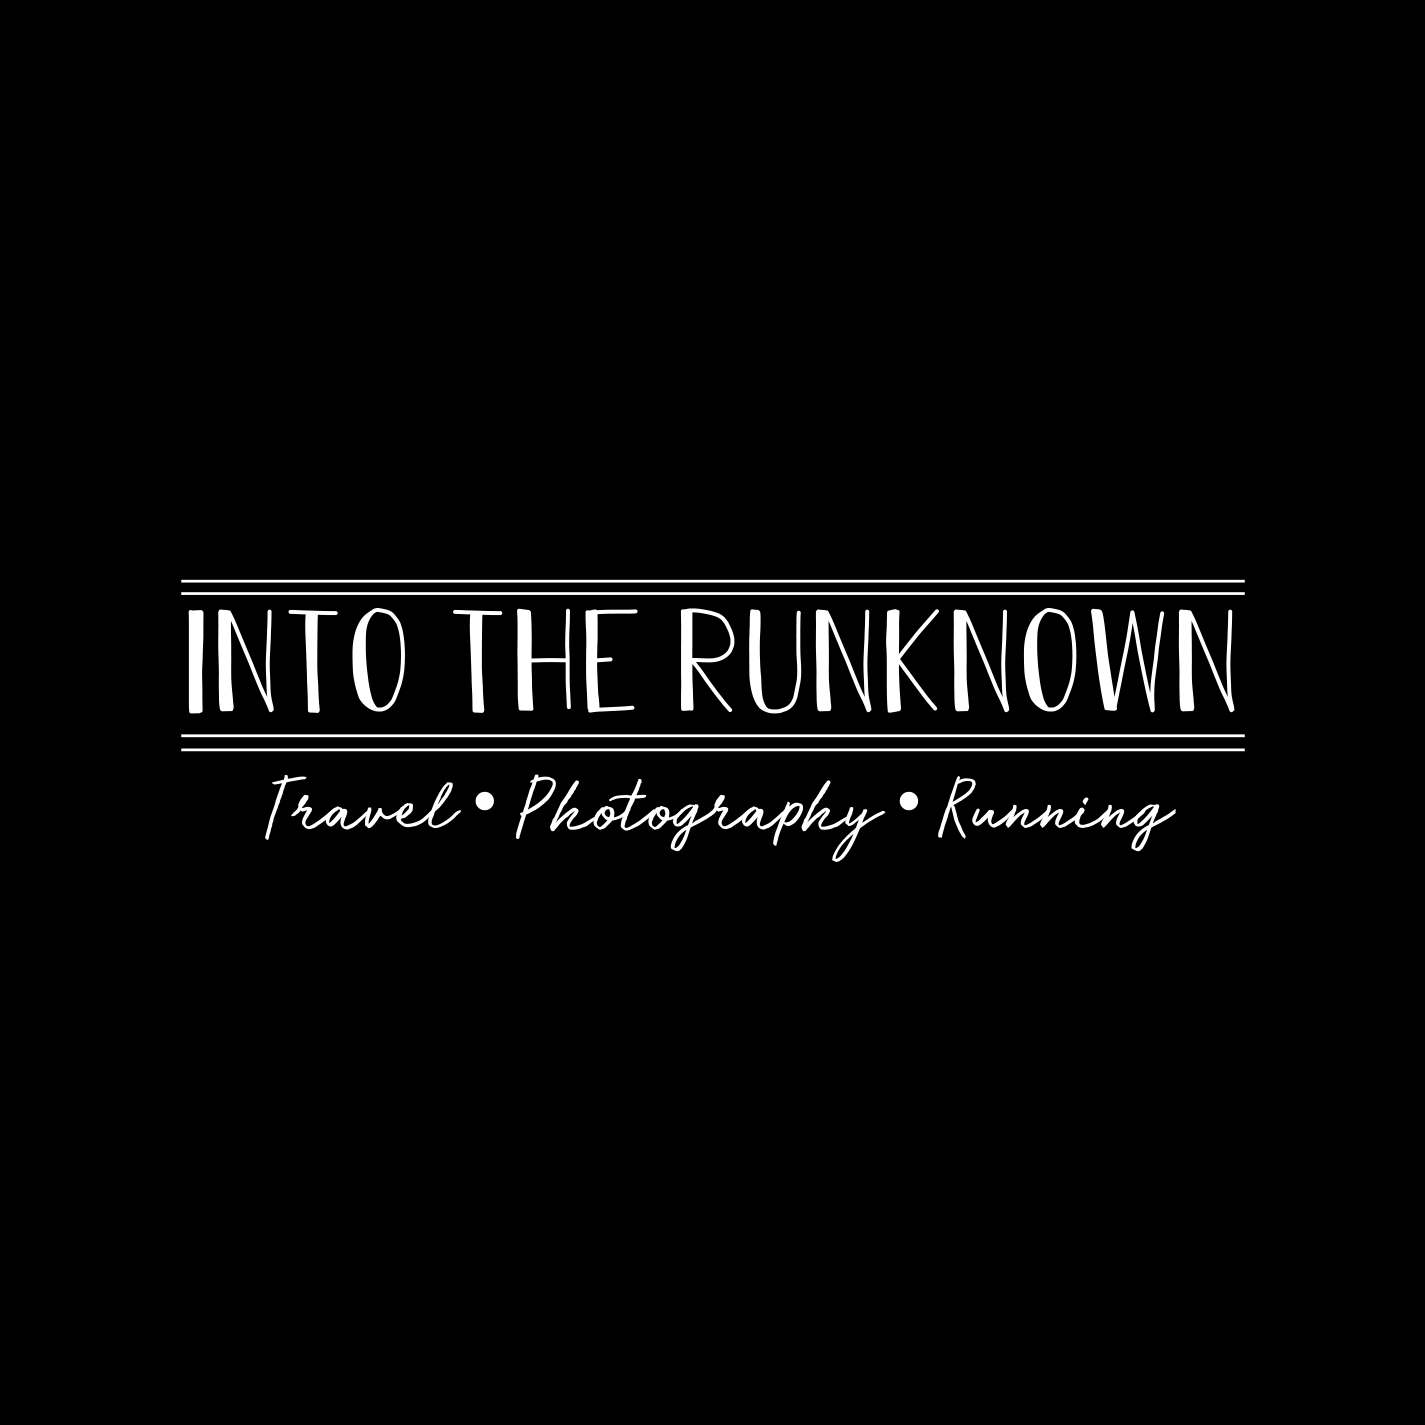 Into the Runknown